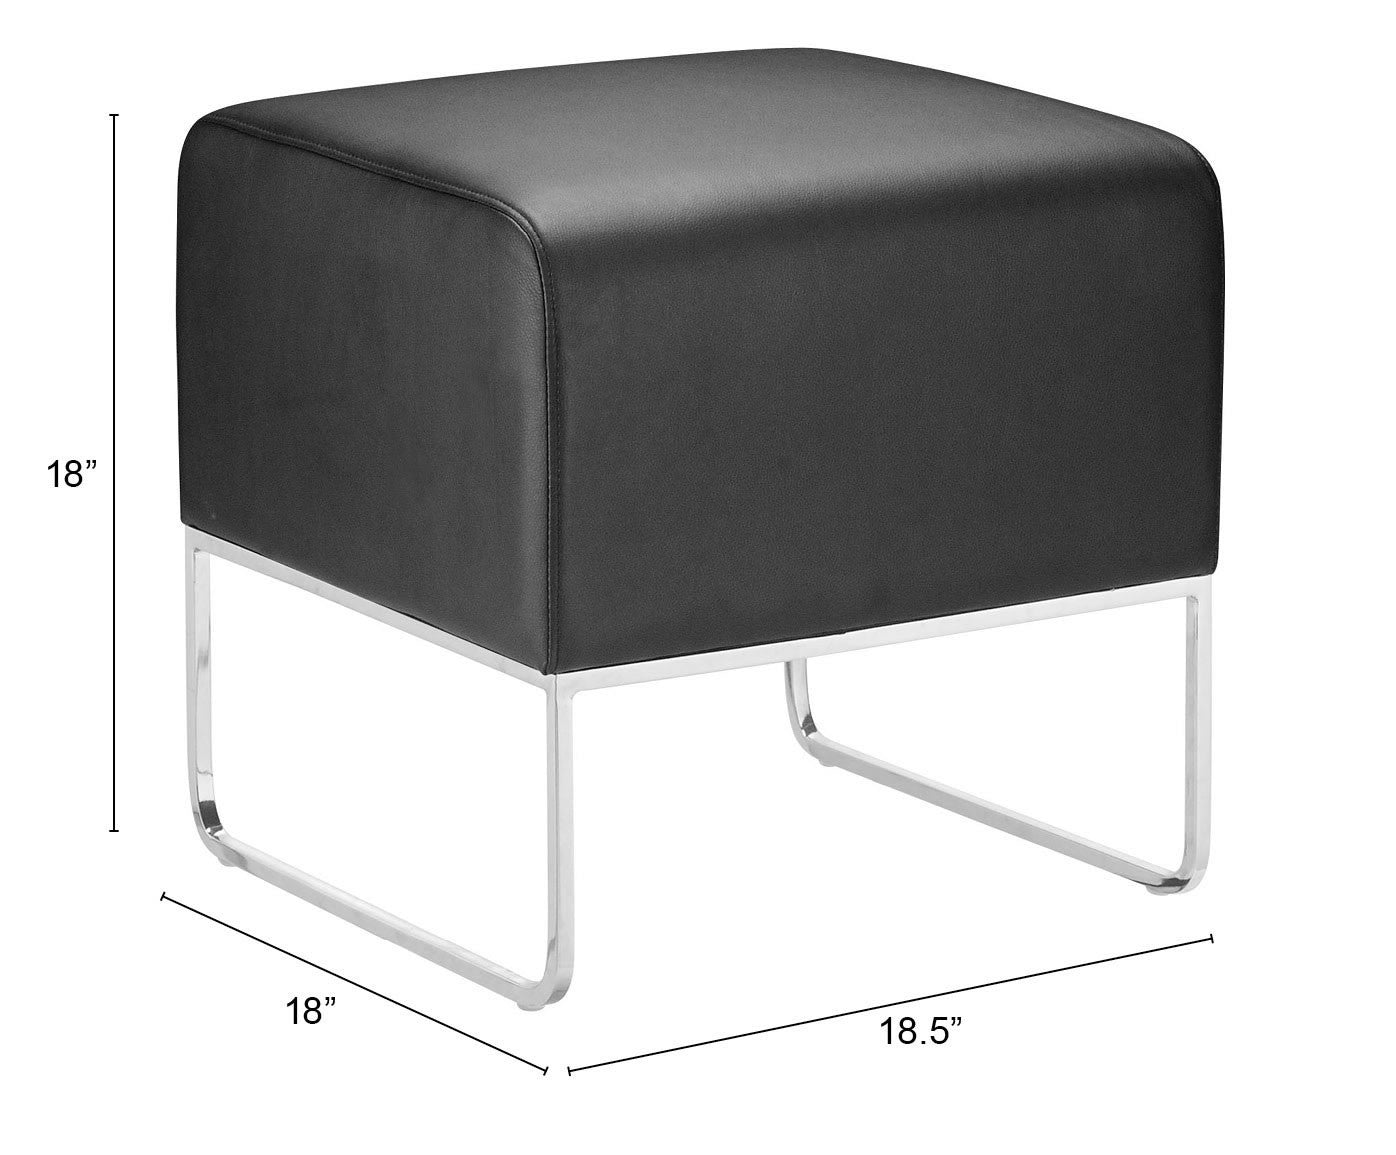 18" Black Faux Leather And Silver Ottoman